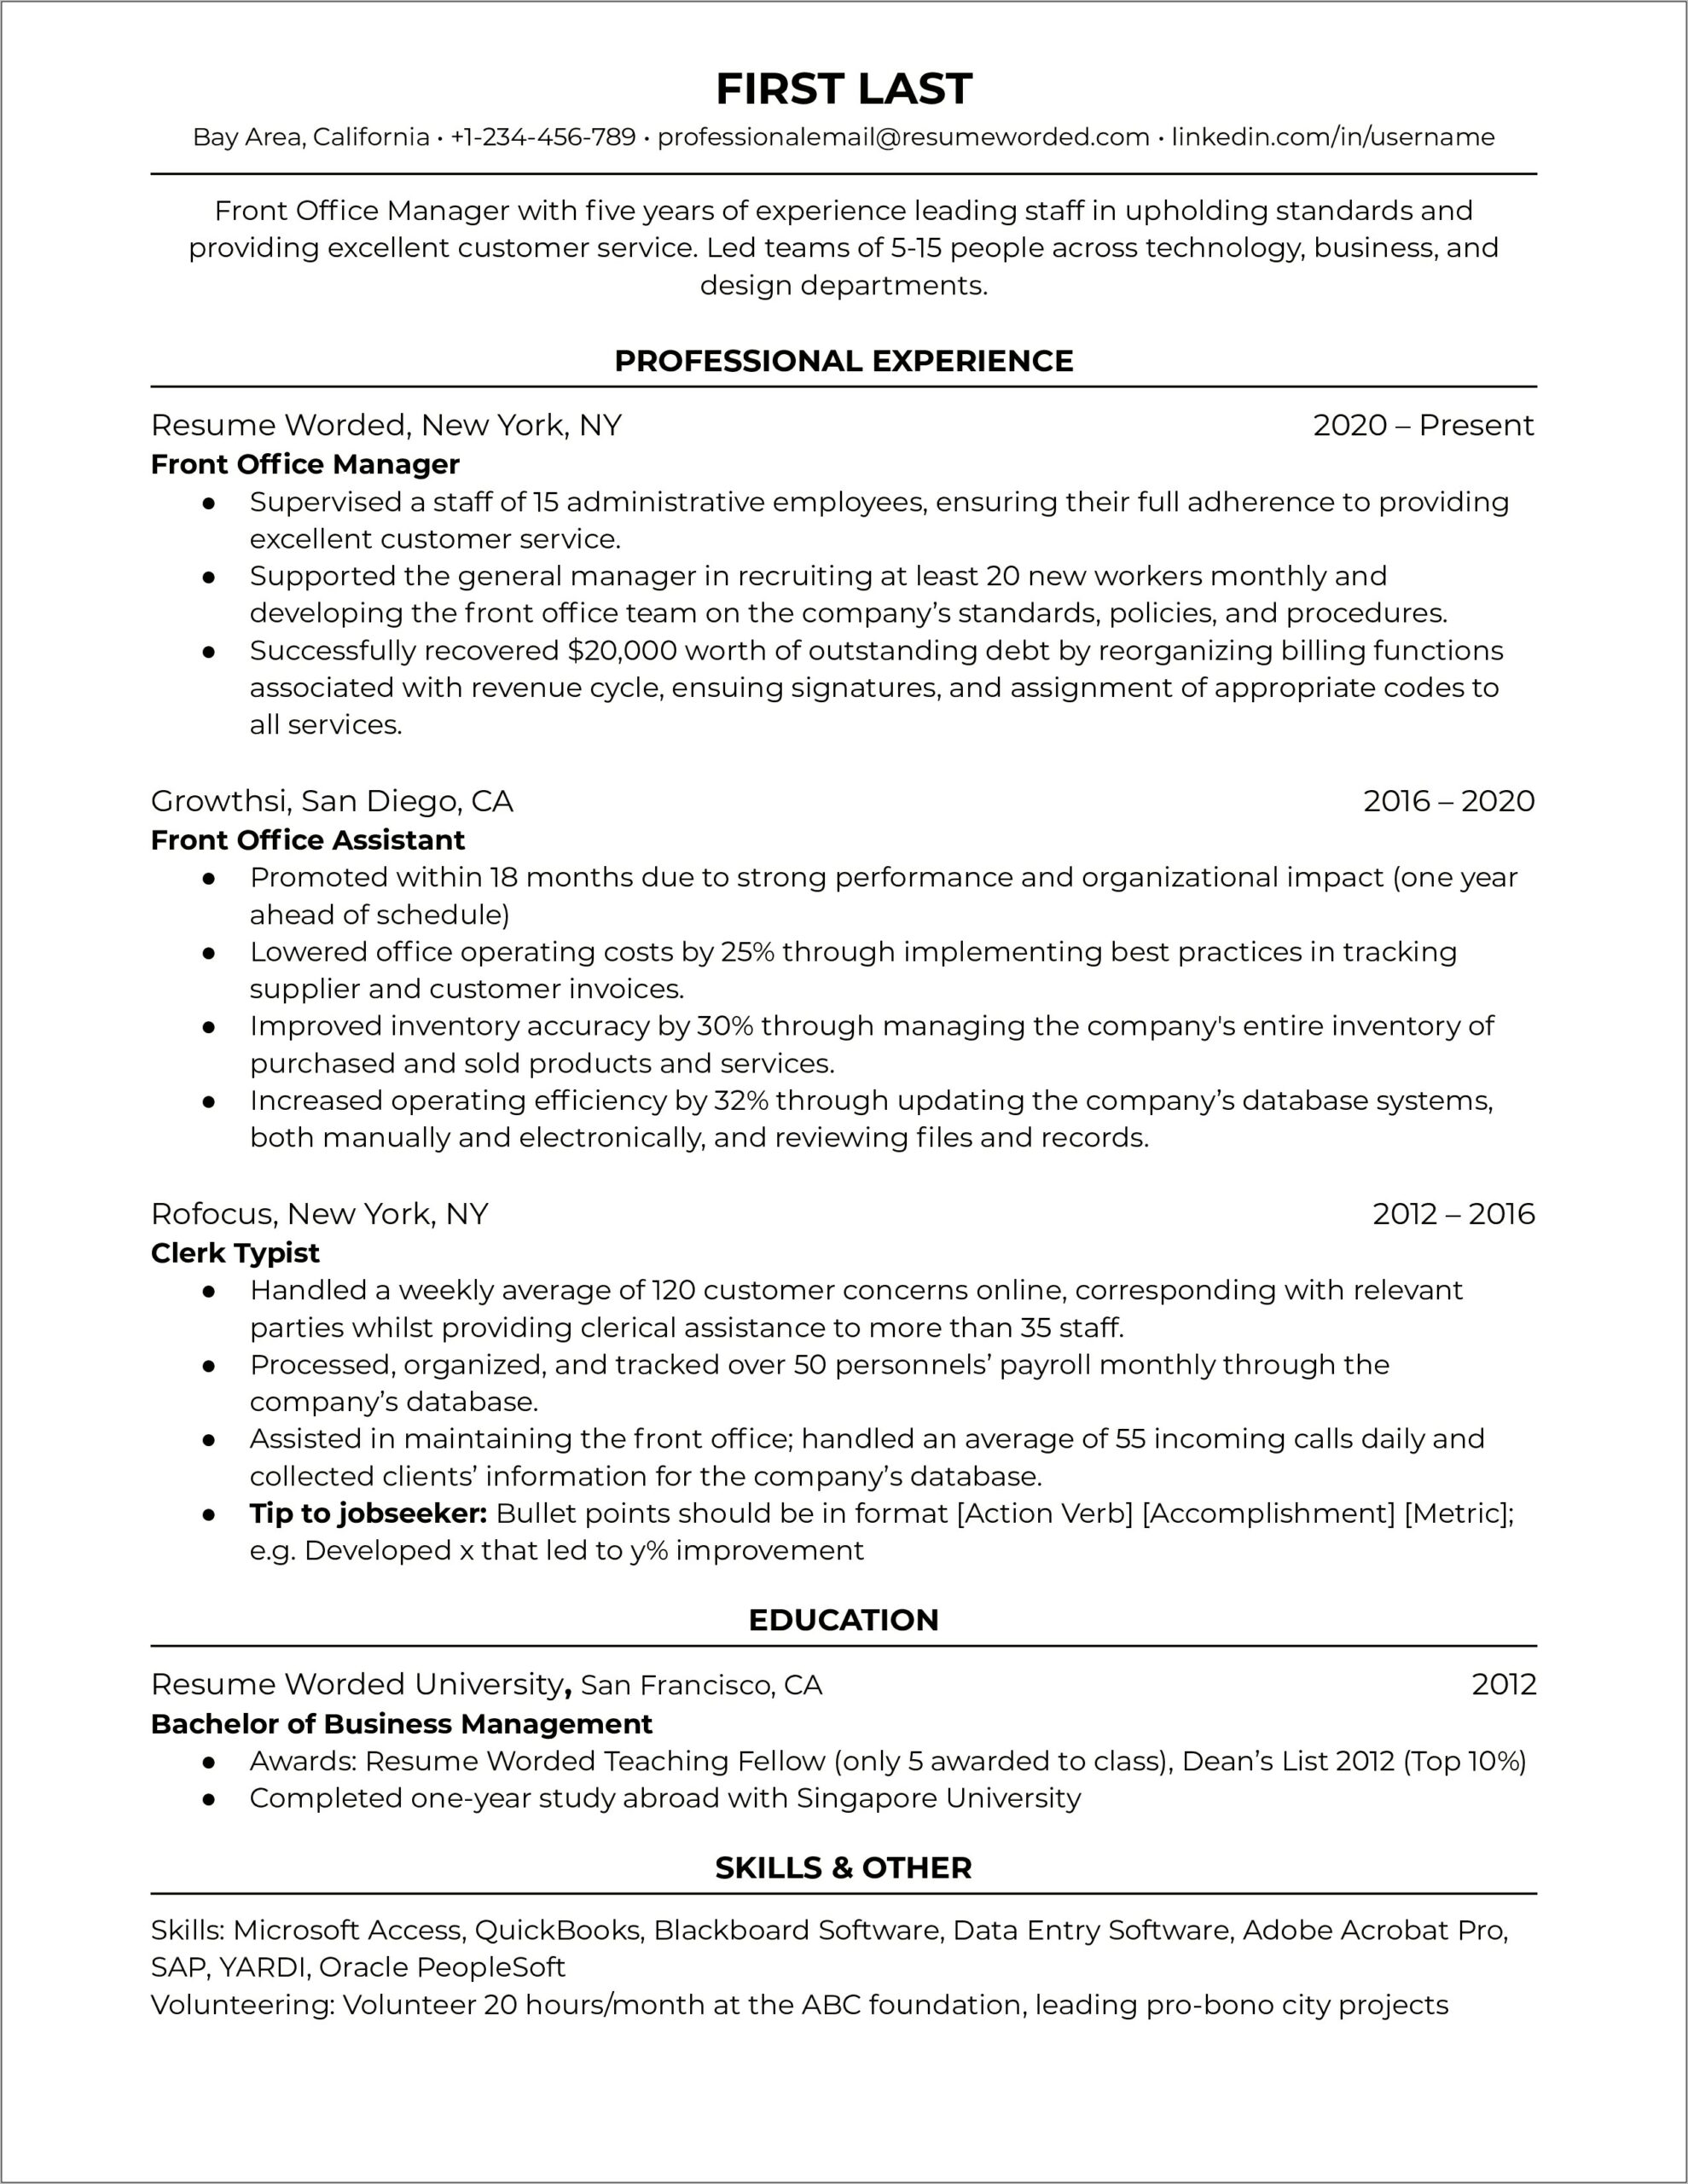 Resume Accomplishment Statemetns For Office Manager